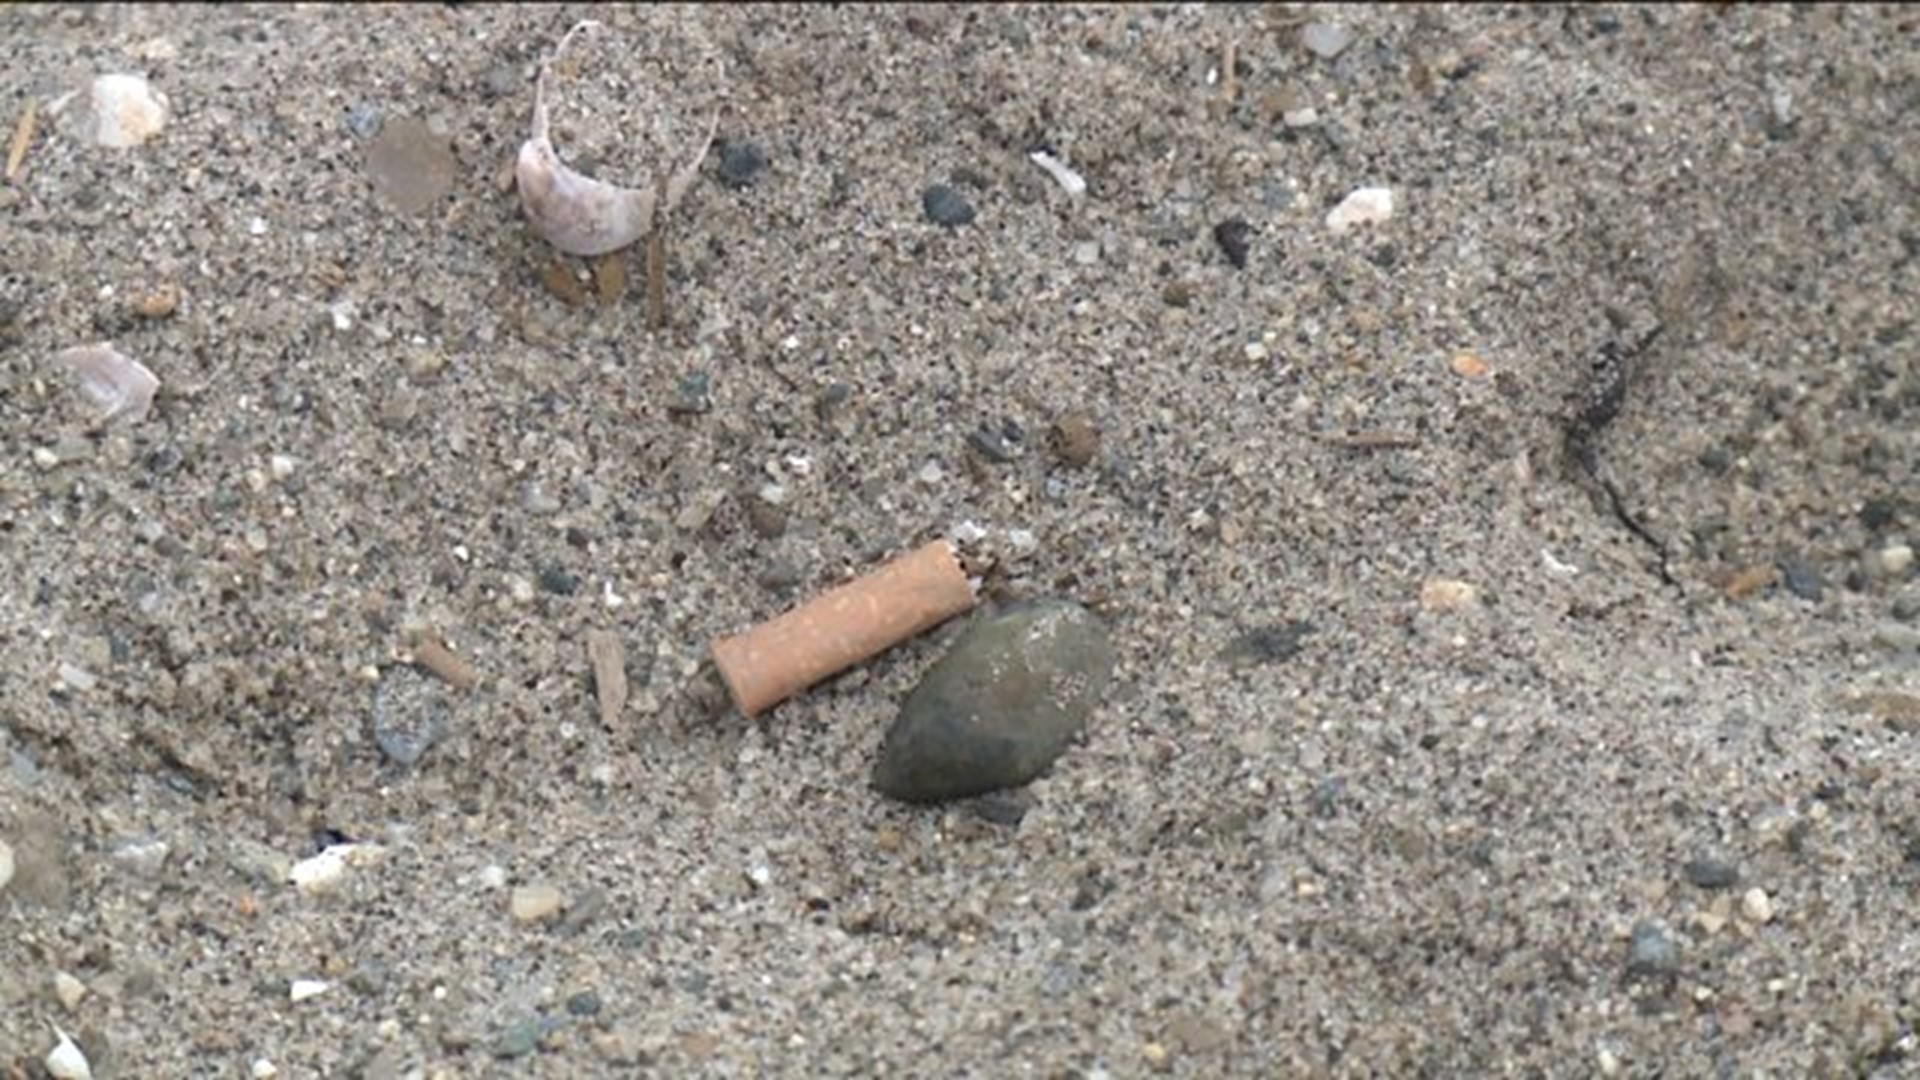 Milford Is Banning Smoking In Beaches, Parks And More